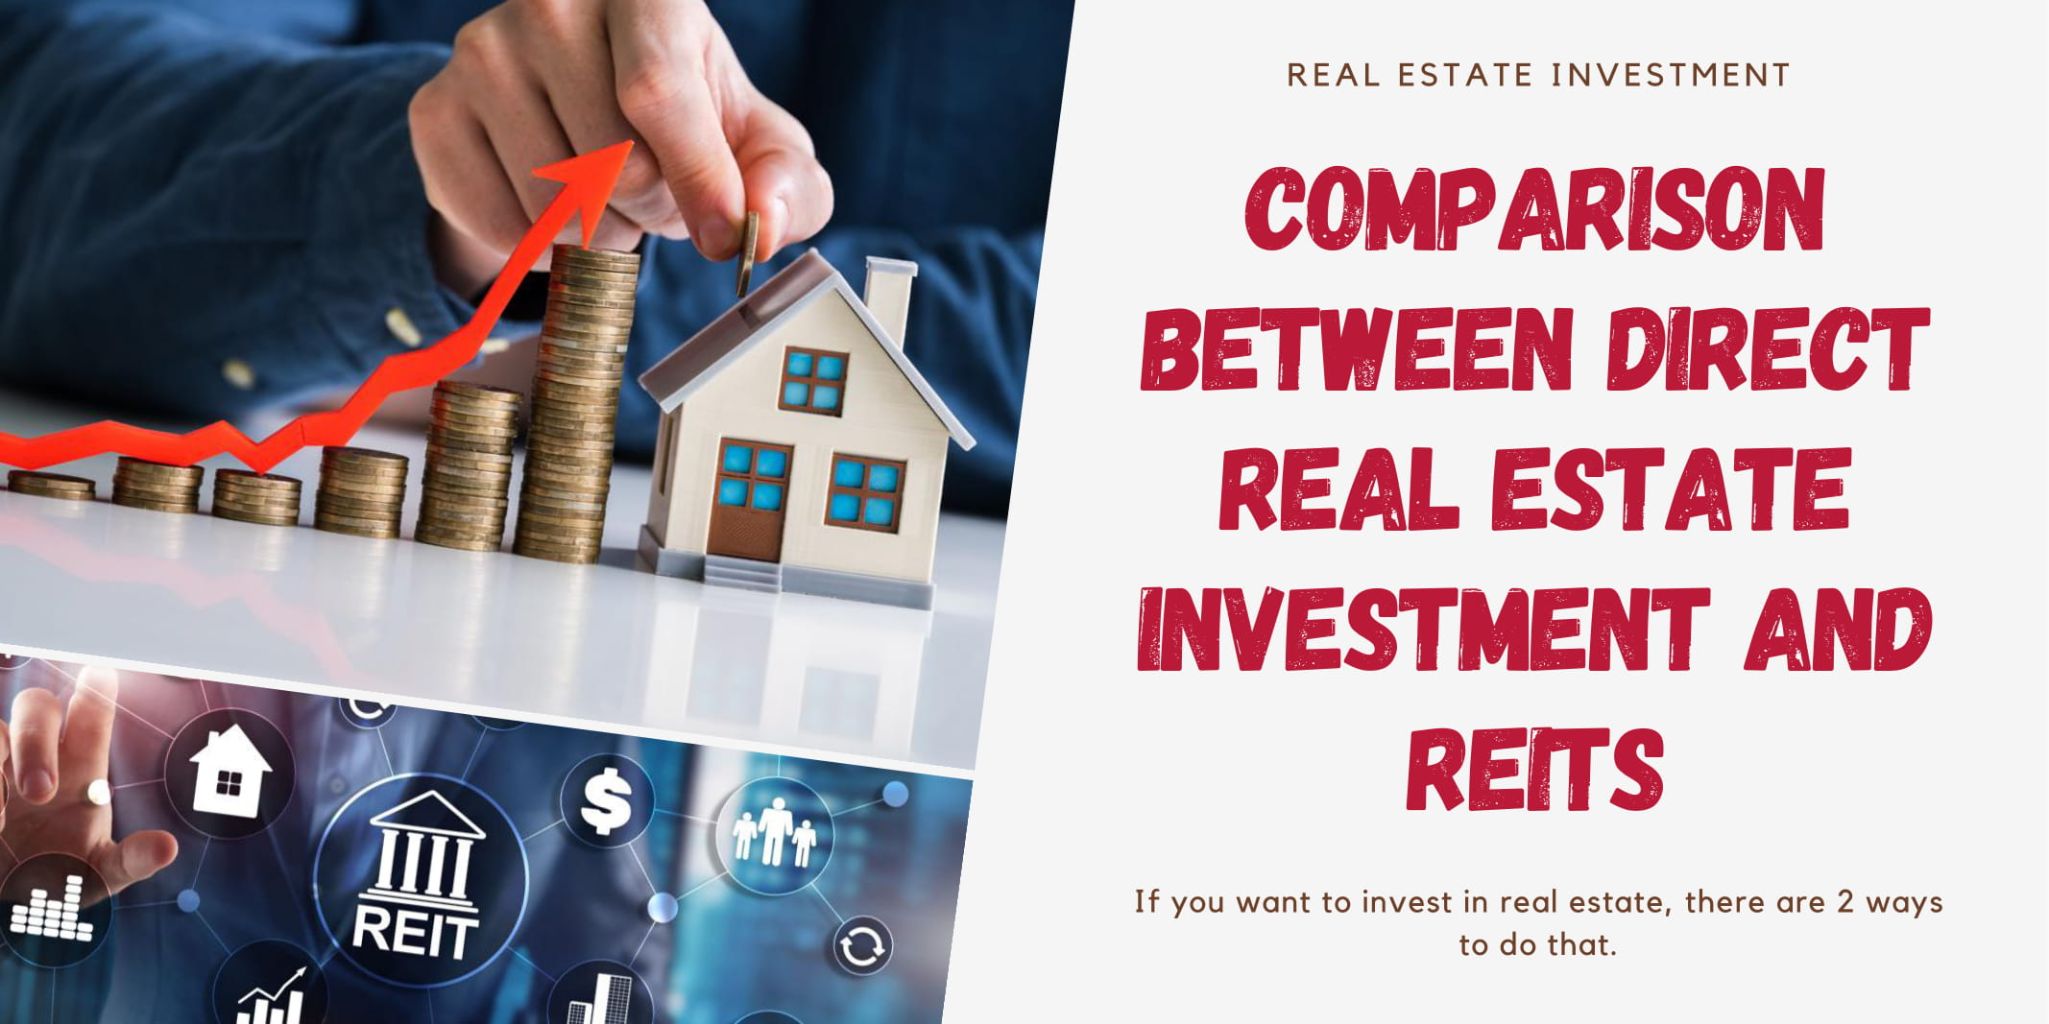 Direct Real Estate Investment Vs REITs - Which One To Choose?